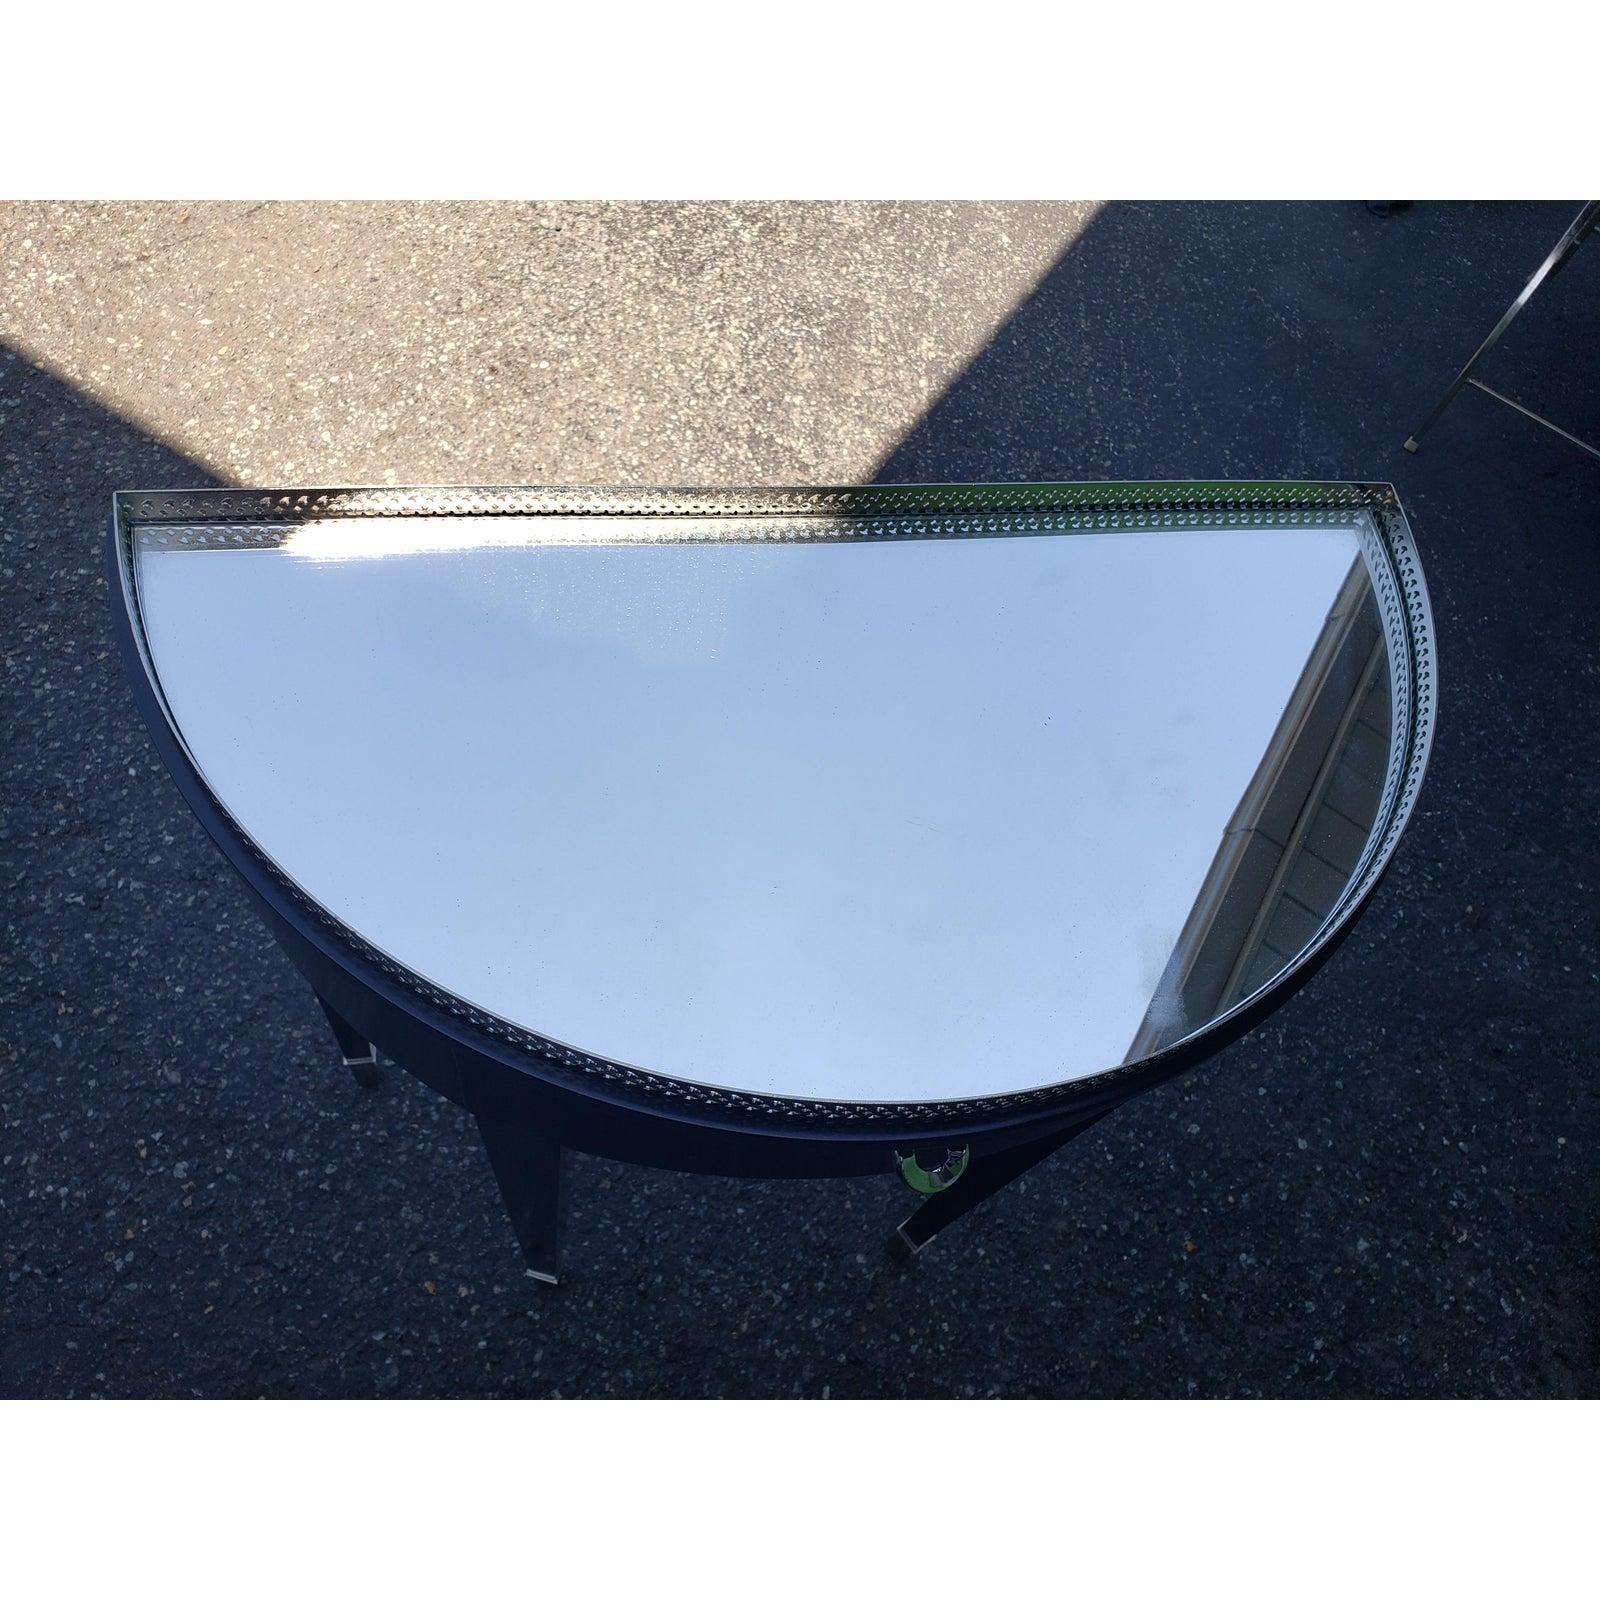 1990s Mirrored Contemporary Foyer Table In Excellent Condition For Sale In Germantown, MD